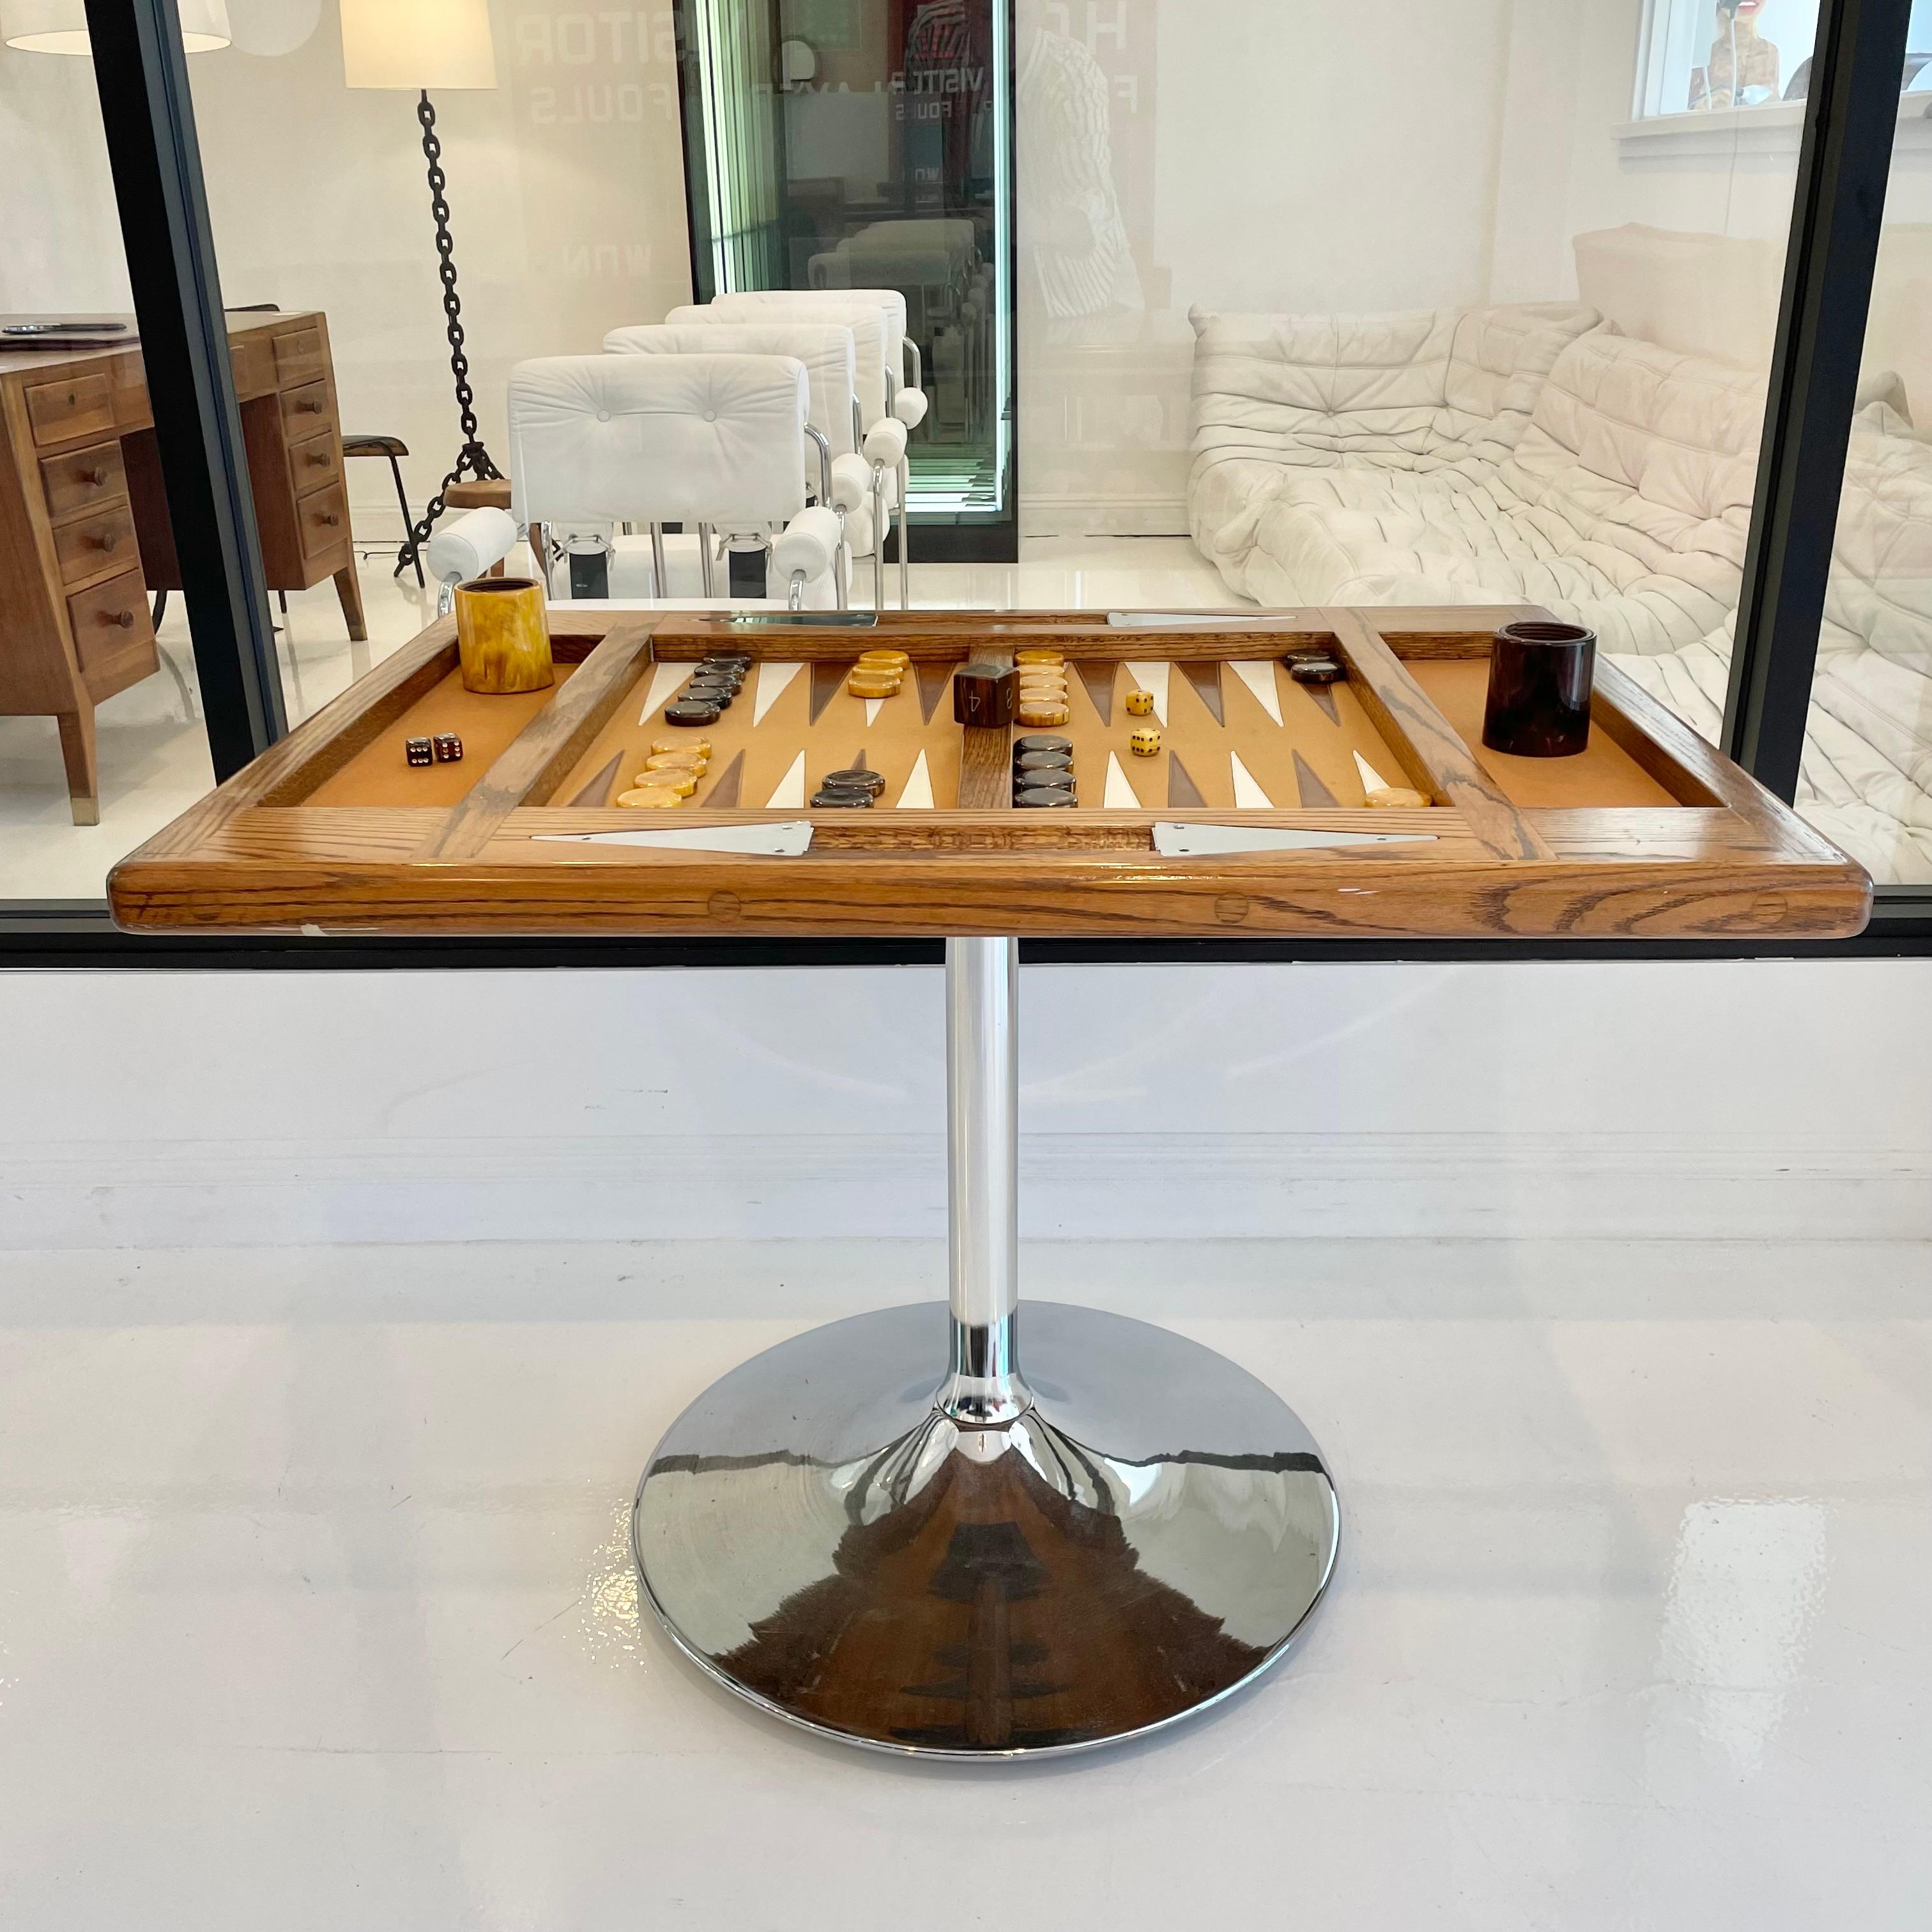 Beautiful oak and chrome backgammon table with a tulip base. Large Bakelite game pieces with perfect coloring and matching dice cups. Massive doubling cube. Carmel felt top with alternating tan and cream leather triangles. Tulip base gives you